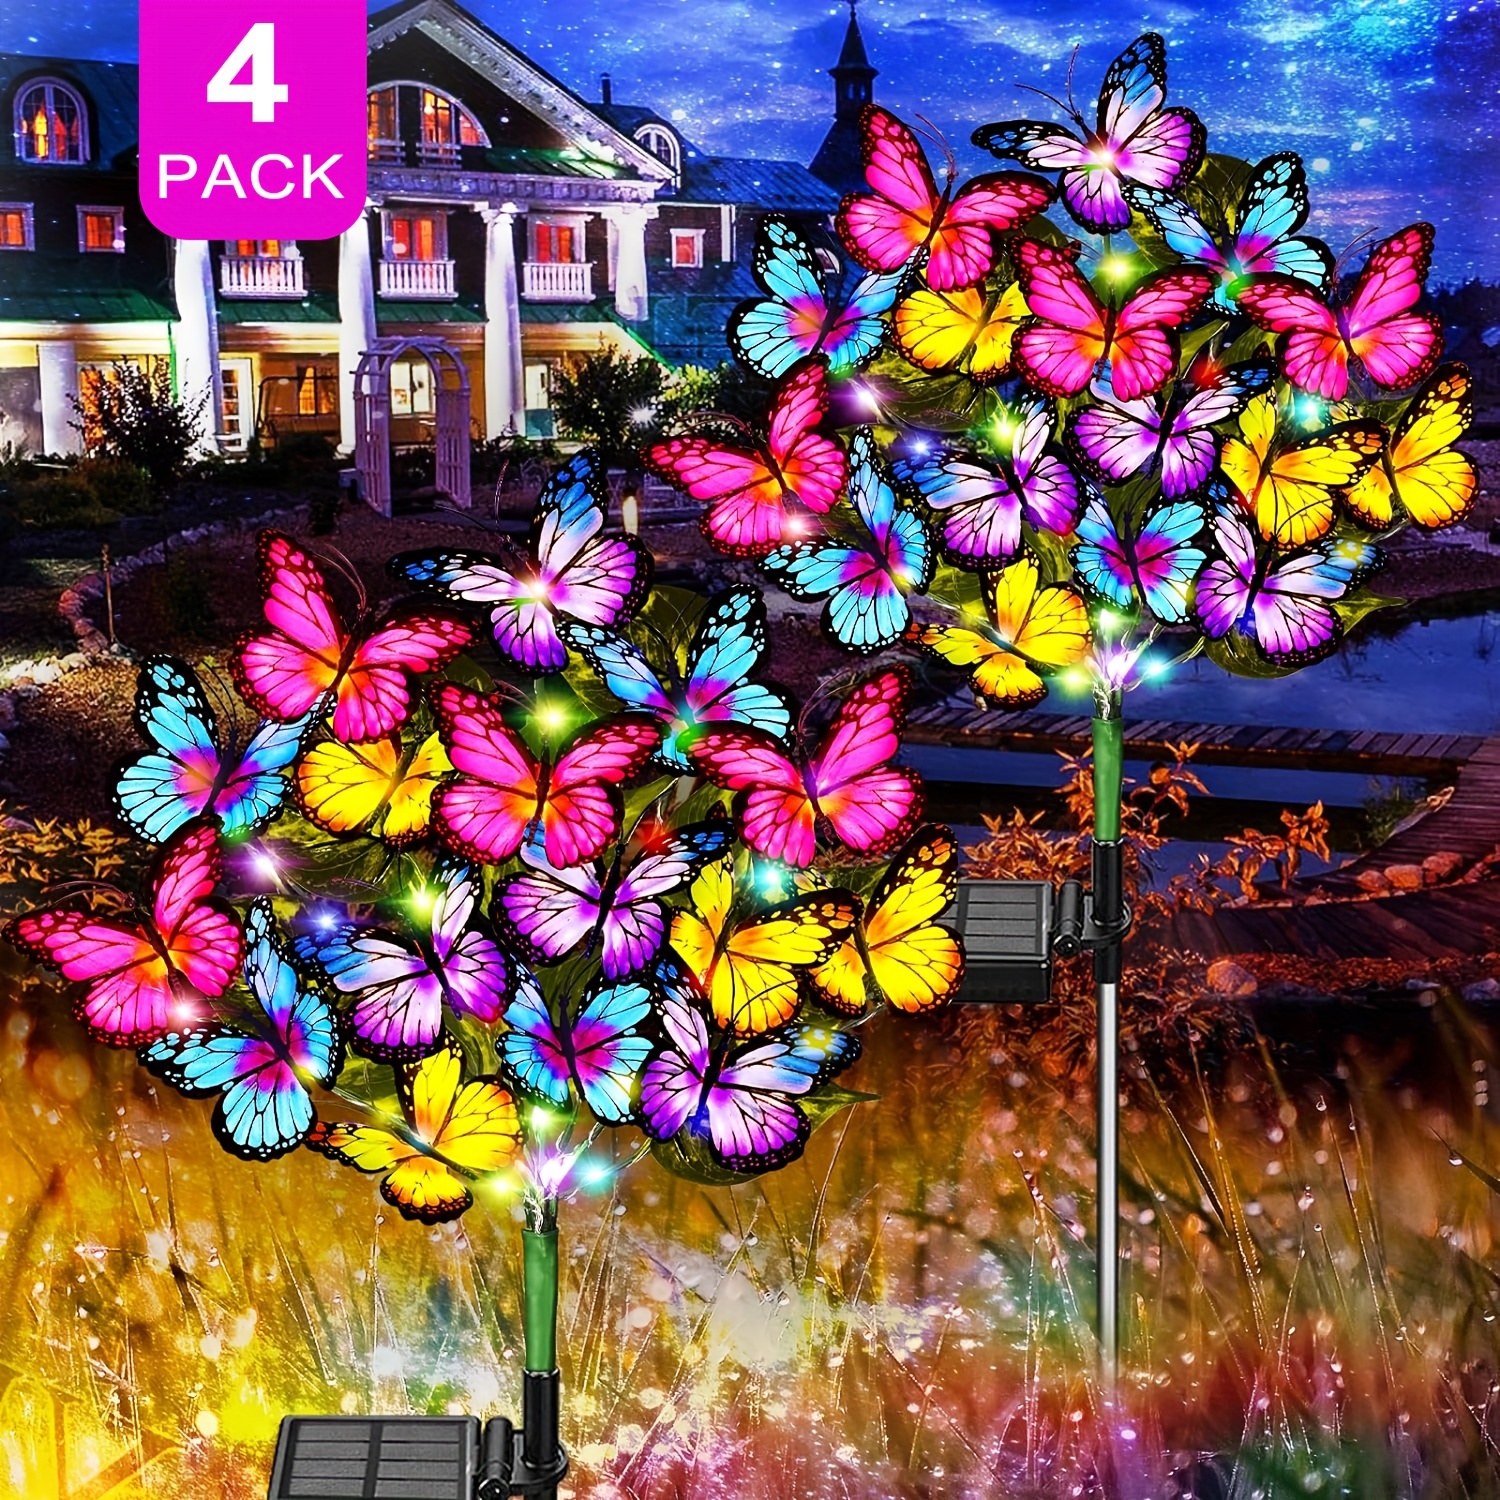 

4 Pack , Outdoor Decorative Solar Lights Outdoor With 44 Led 34 Butterfly Solar Lights For Garden Yard Patio Lawn Outdoor Decor, And Christmas Atmosphere Lights